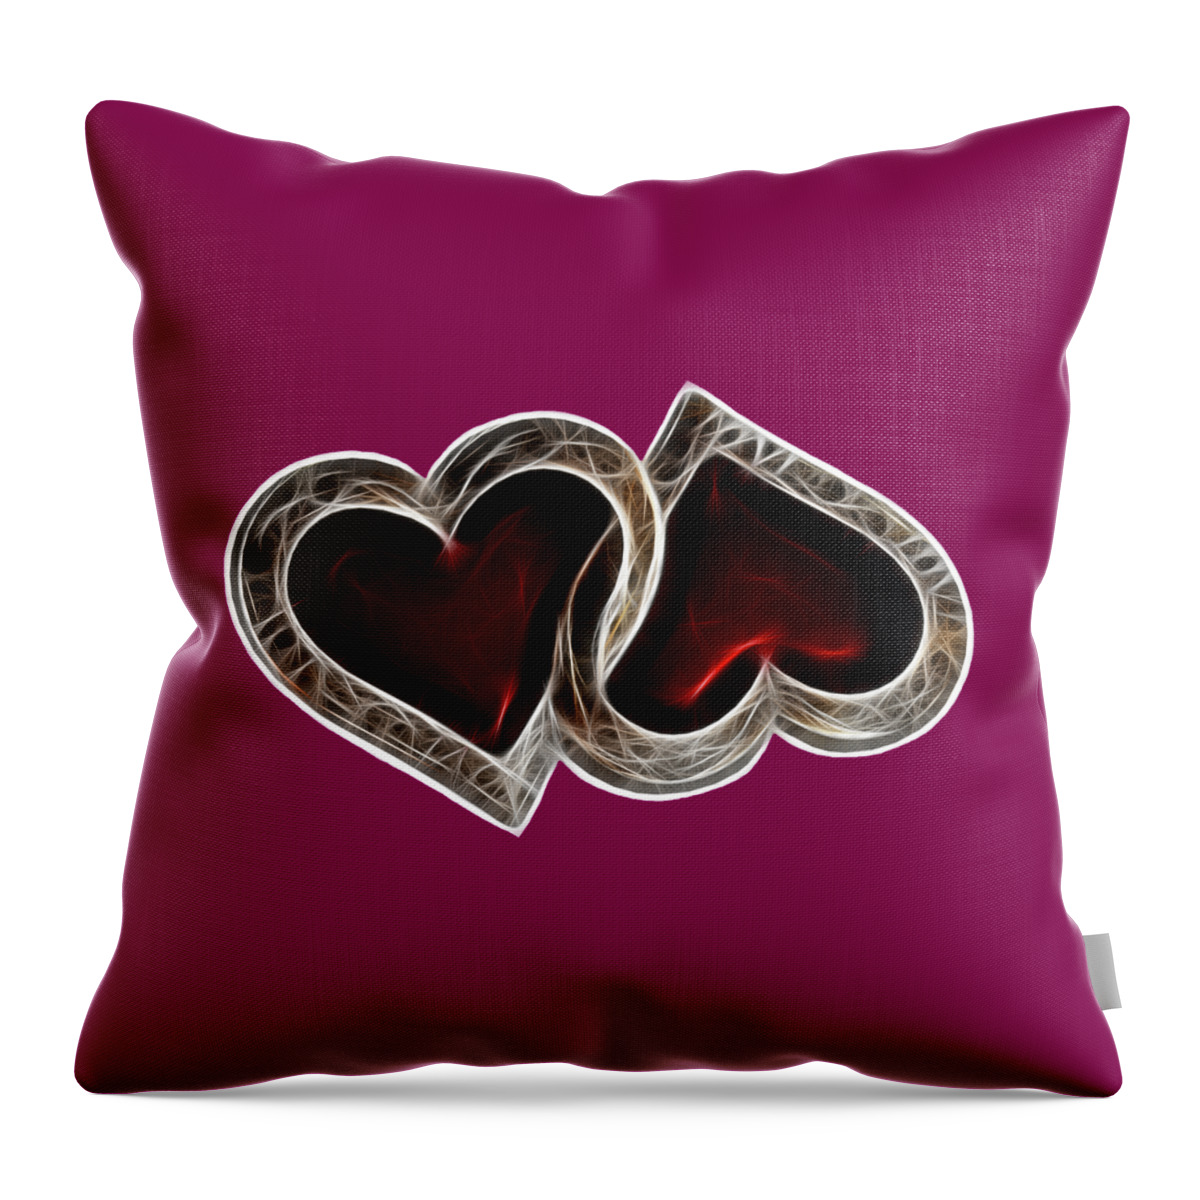 Heart Throw Pillow featuring the photograph A Pair Of Hearts - Horizontal by Shane Bechler